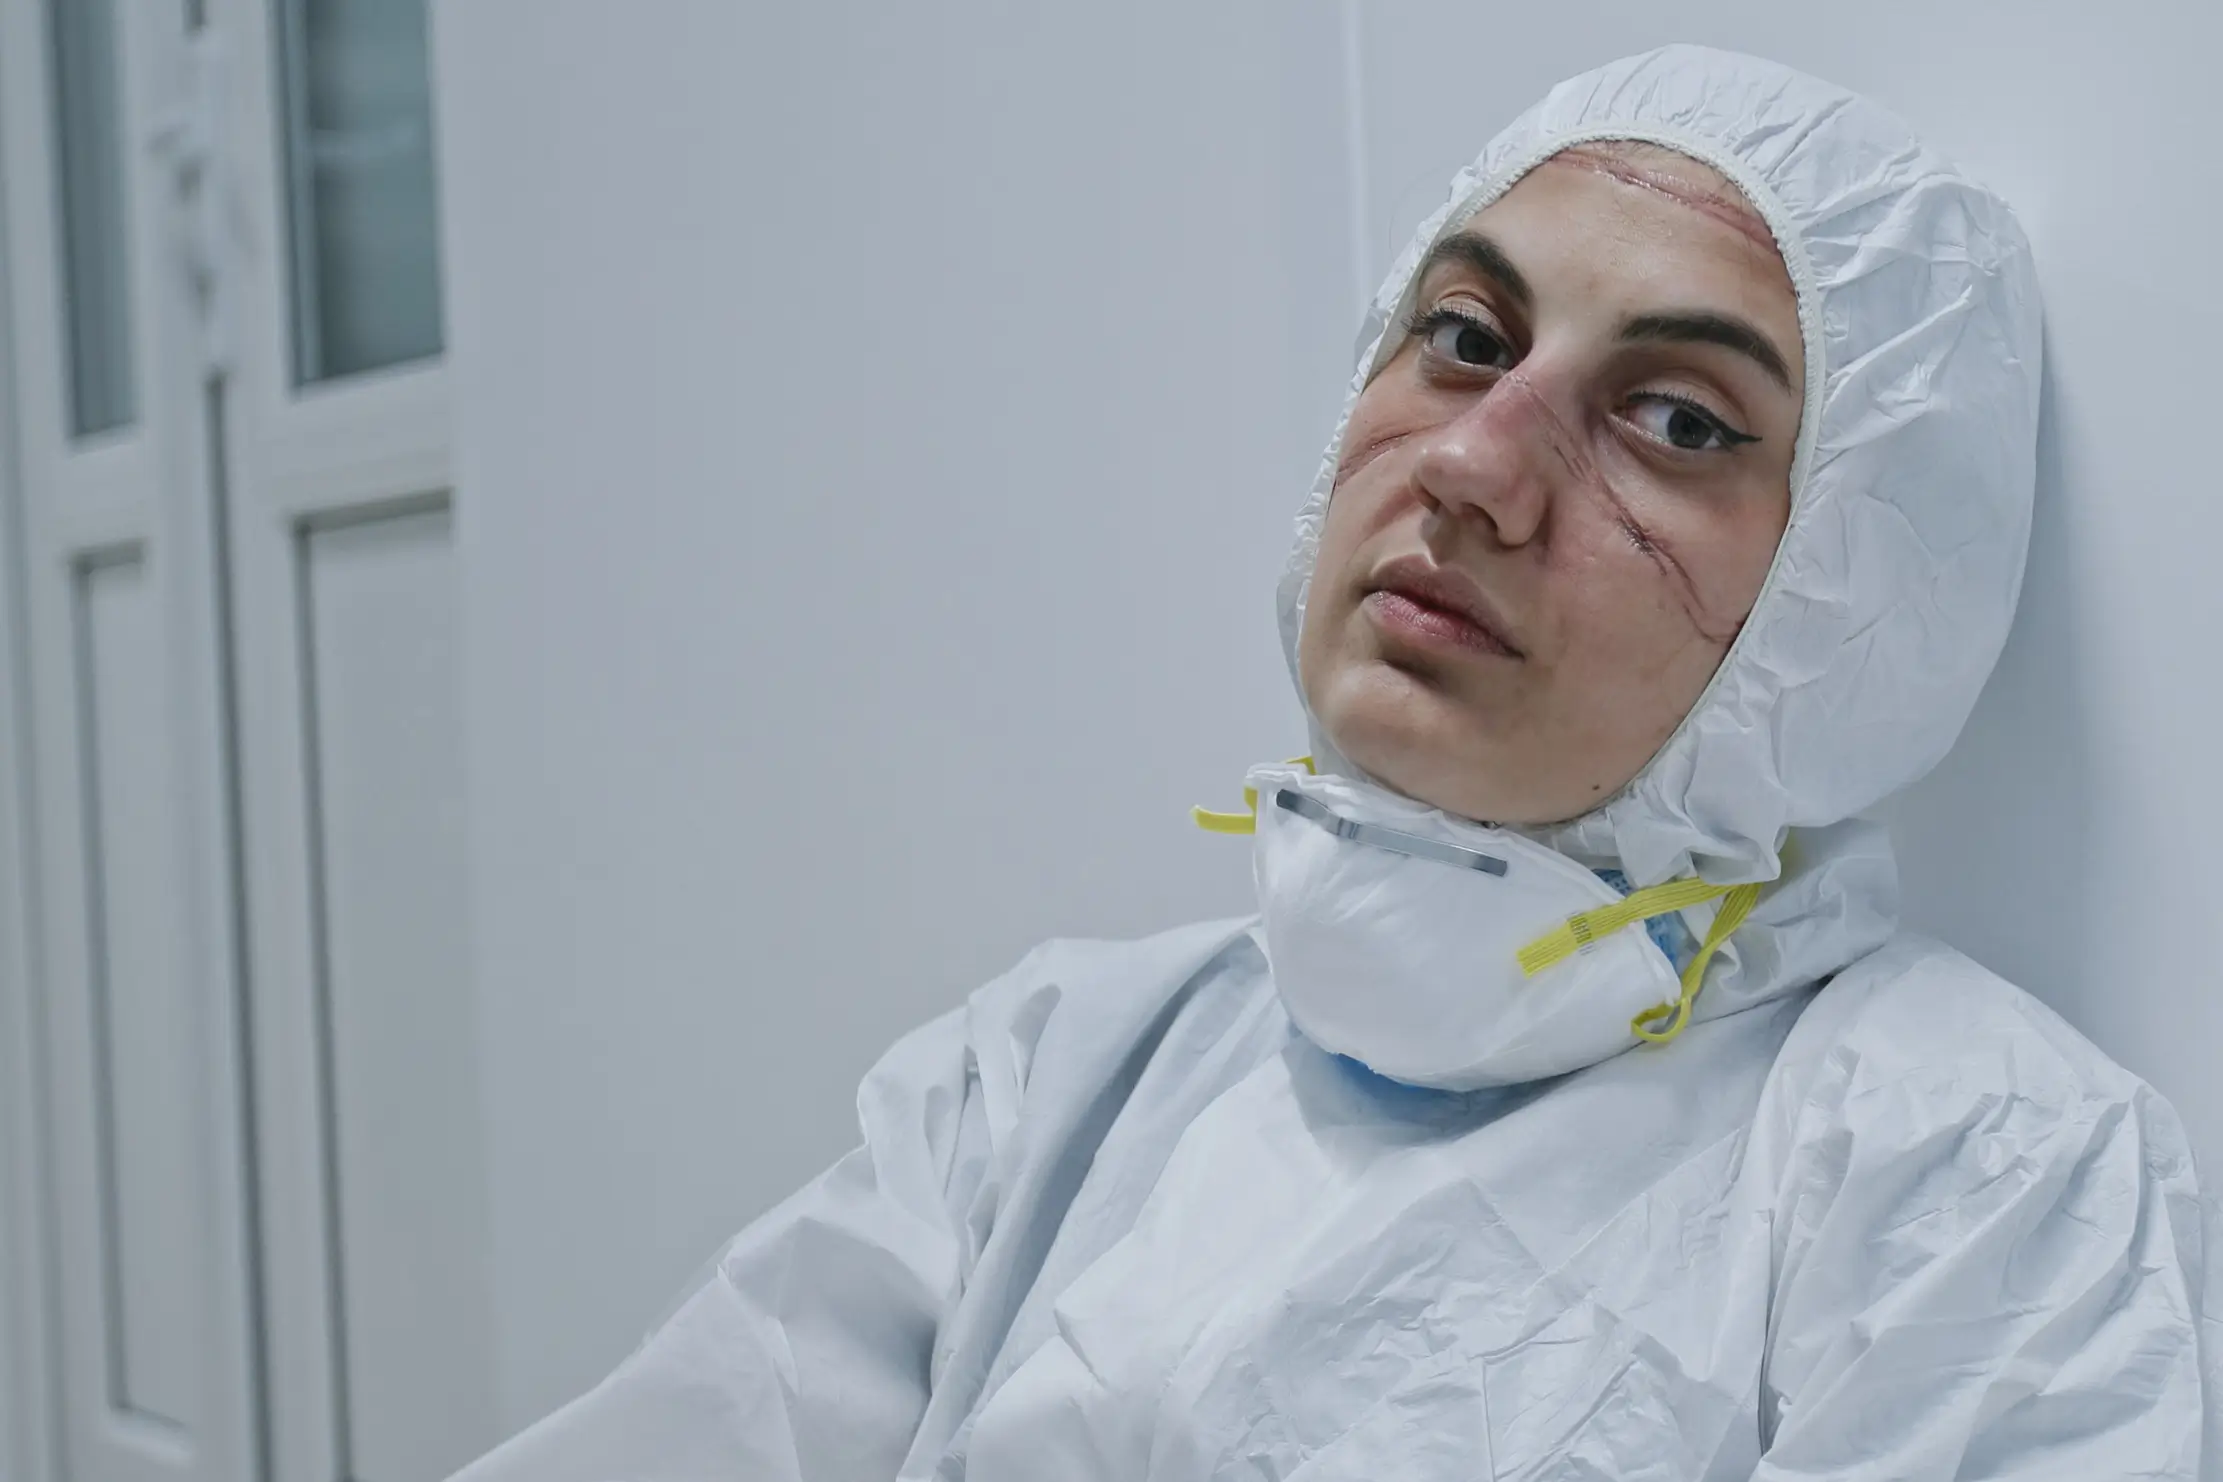 An exhausted healthcare worker wearing a white protective suit, face mask, and head covering sits against a wall, with noticeable facial marks from prolonged mask use. The setting appears to be a clinical or hospital environment, highlighting the urgent need for effective health care advocacy.